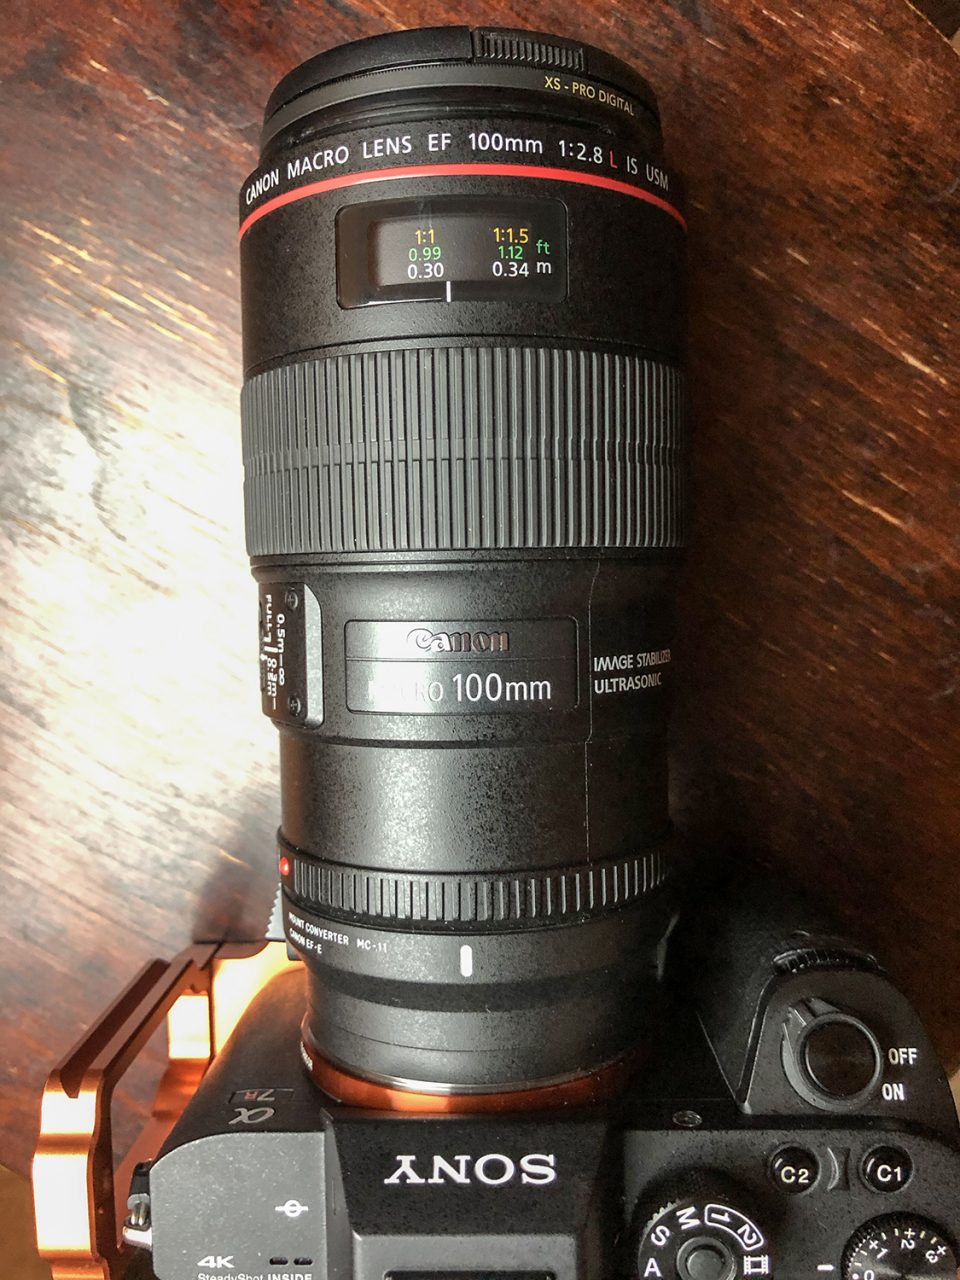 Canon EF 100mm Macro L lens with Sigma MC-11 adapter for Sony cameras